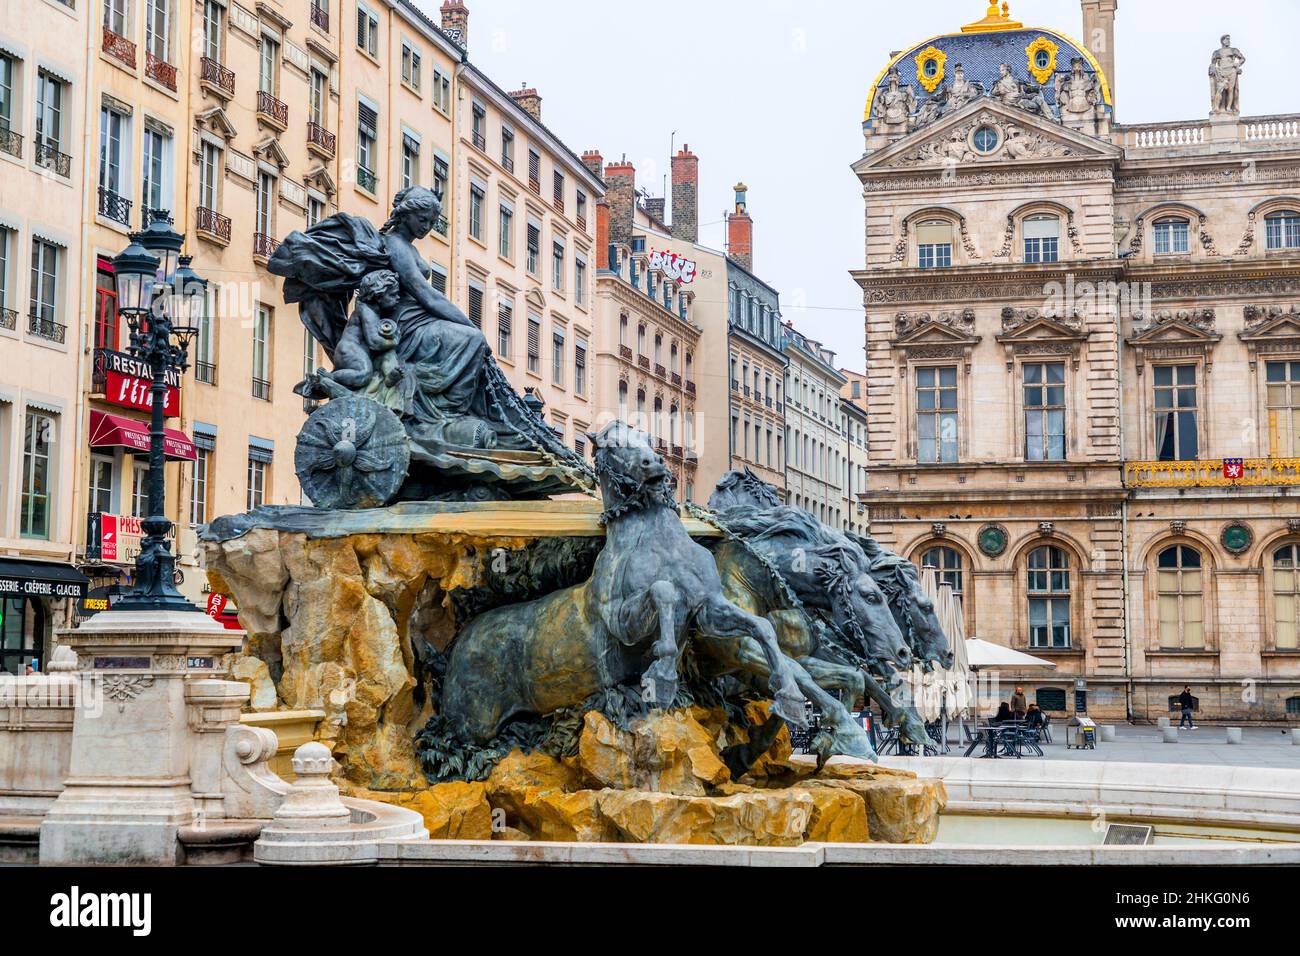 Lyon, France - JAN 26, 2022: Fontaine Bartholdi is a fountain sculpted by Frederic Auguste Bartholdi and realised in 1889 by Gaget & Gautier. Place de Stock Photo